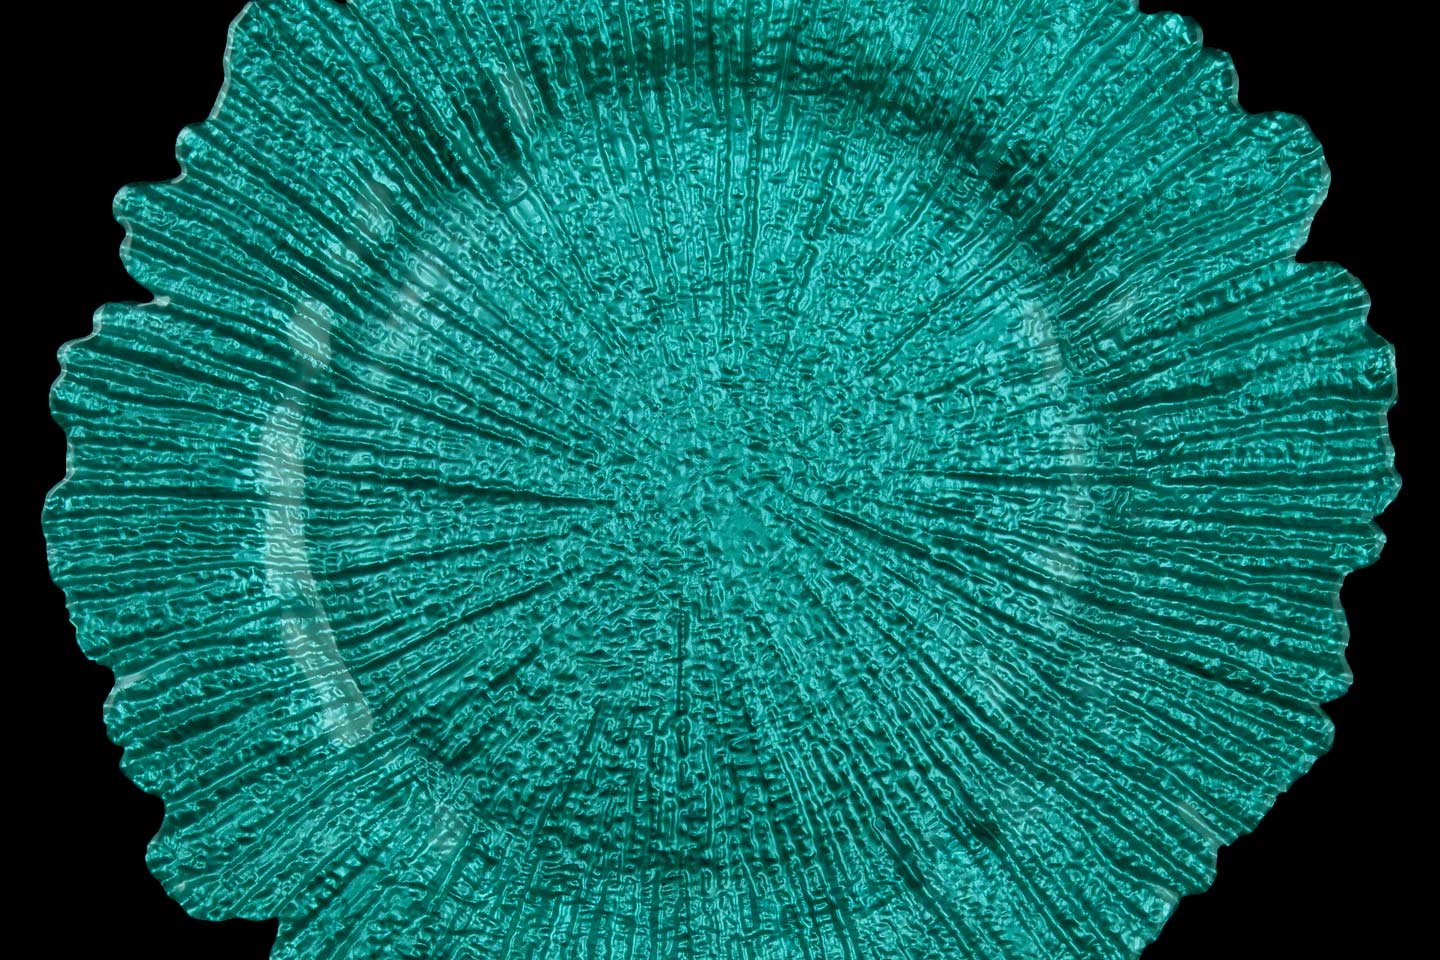 the turquoise sea sponge charger plate from mandarin orange trading company, photographed by Jacob Rosenfeld